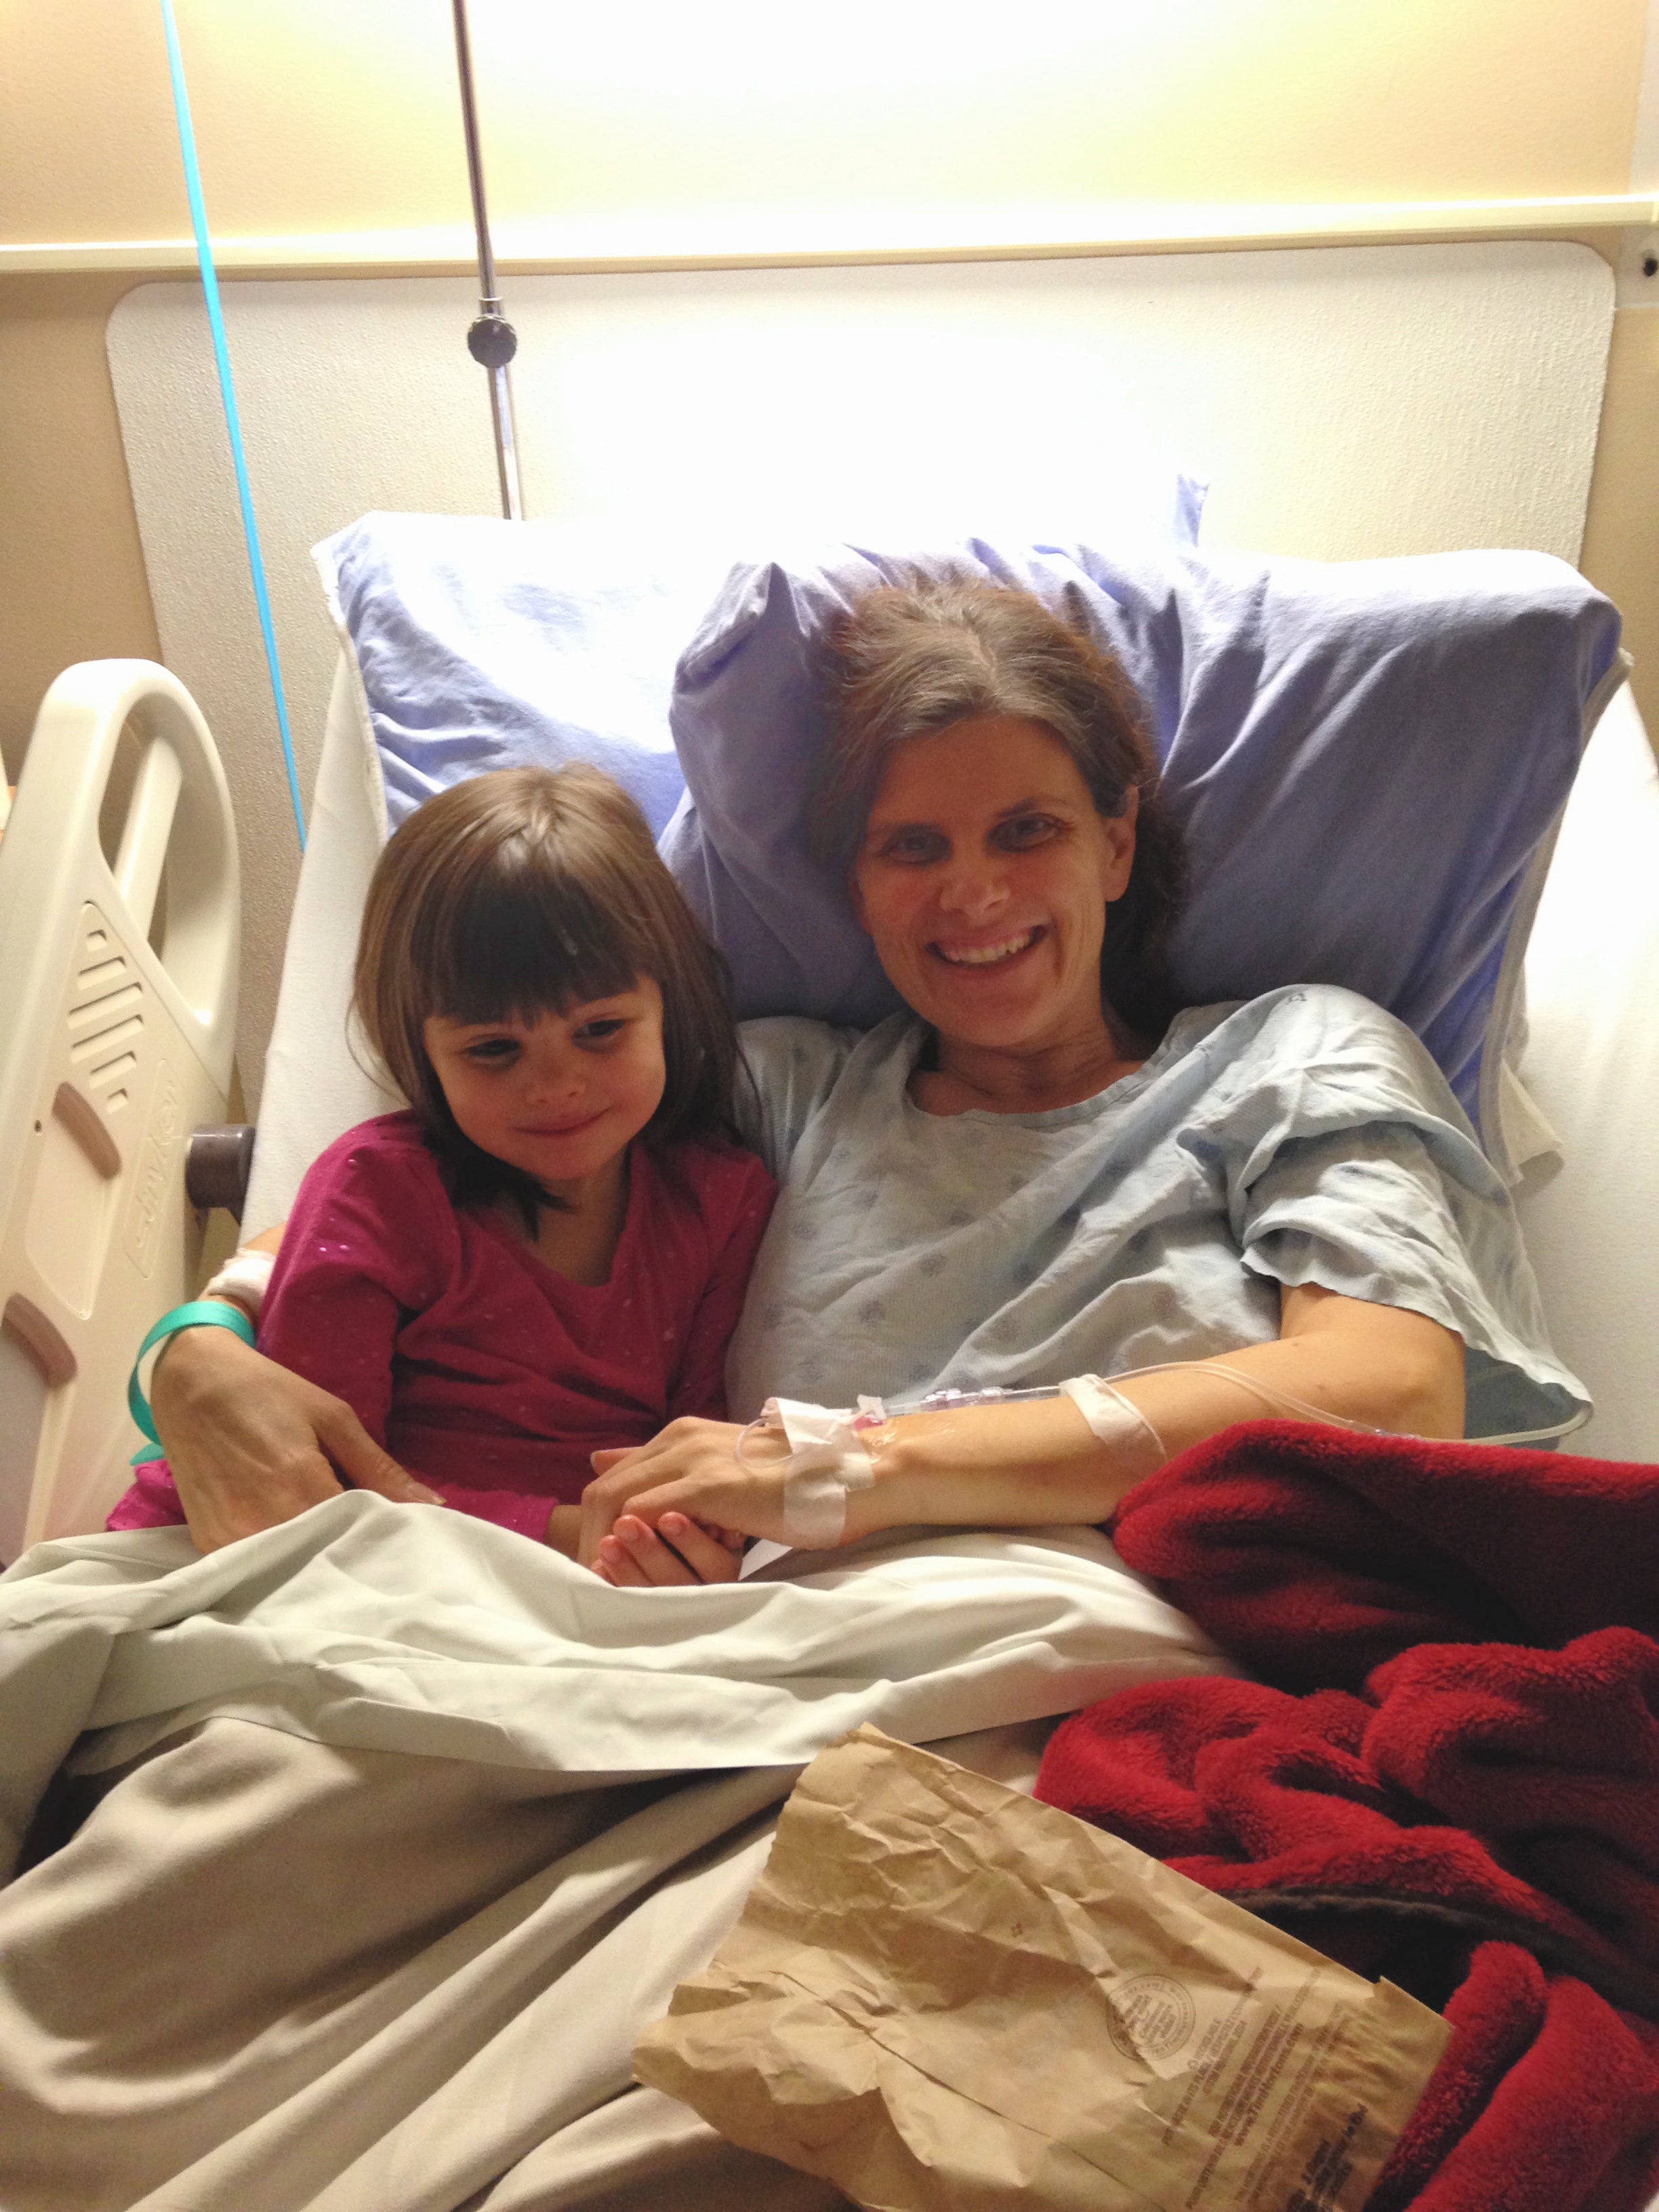 Julie in a hospital bed with her daughter cuddles beside her